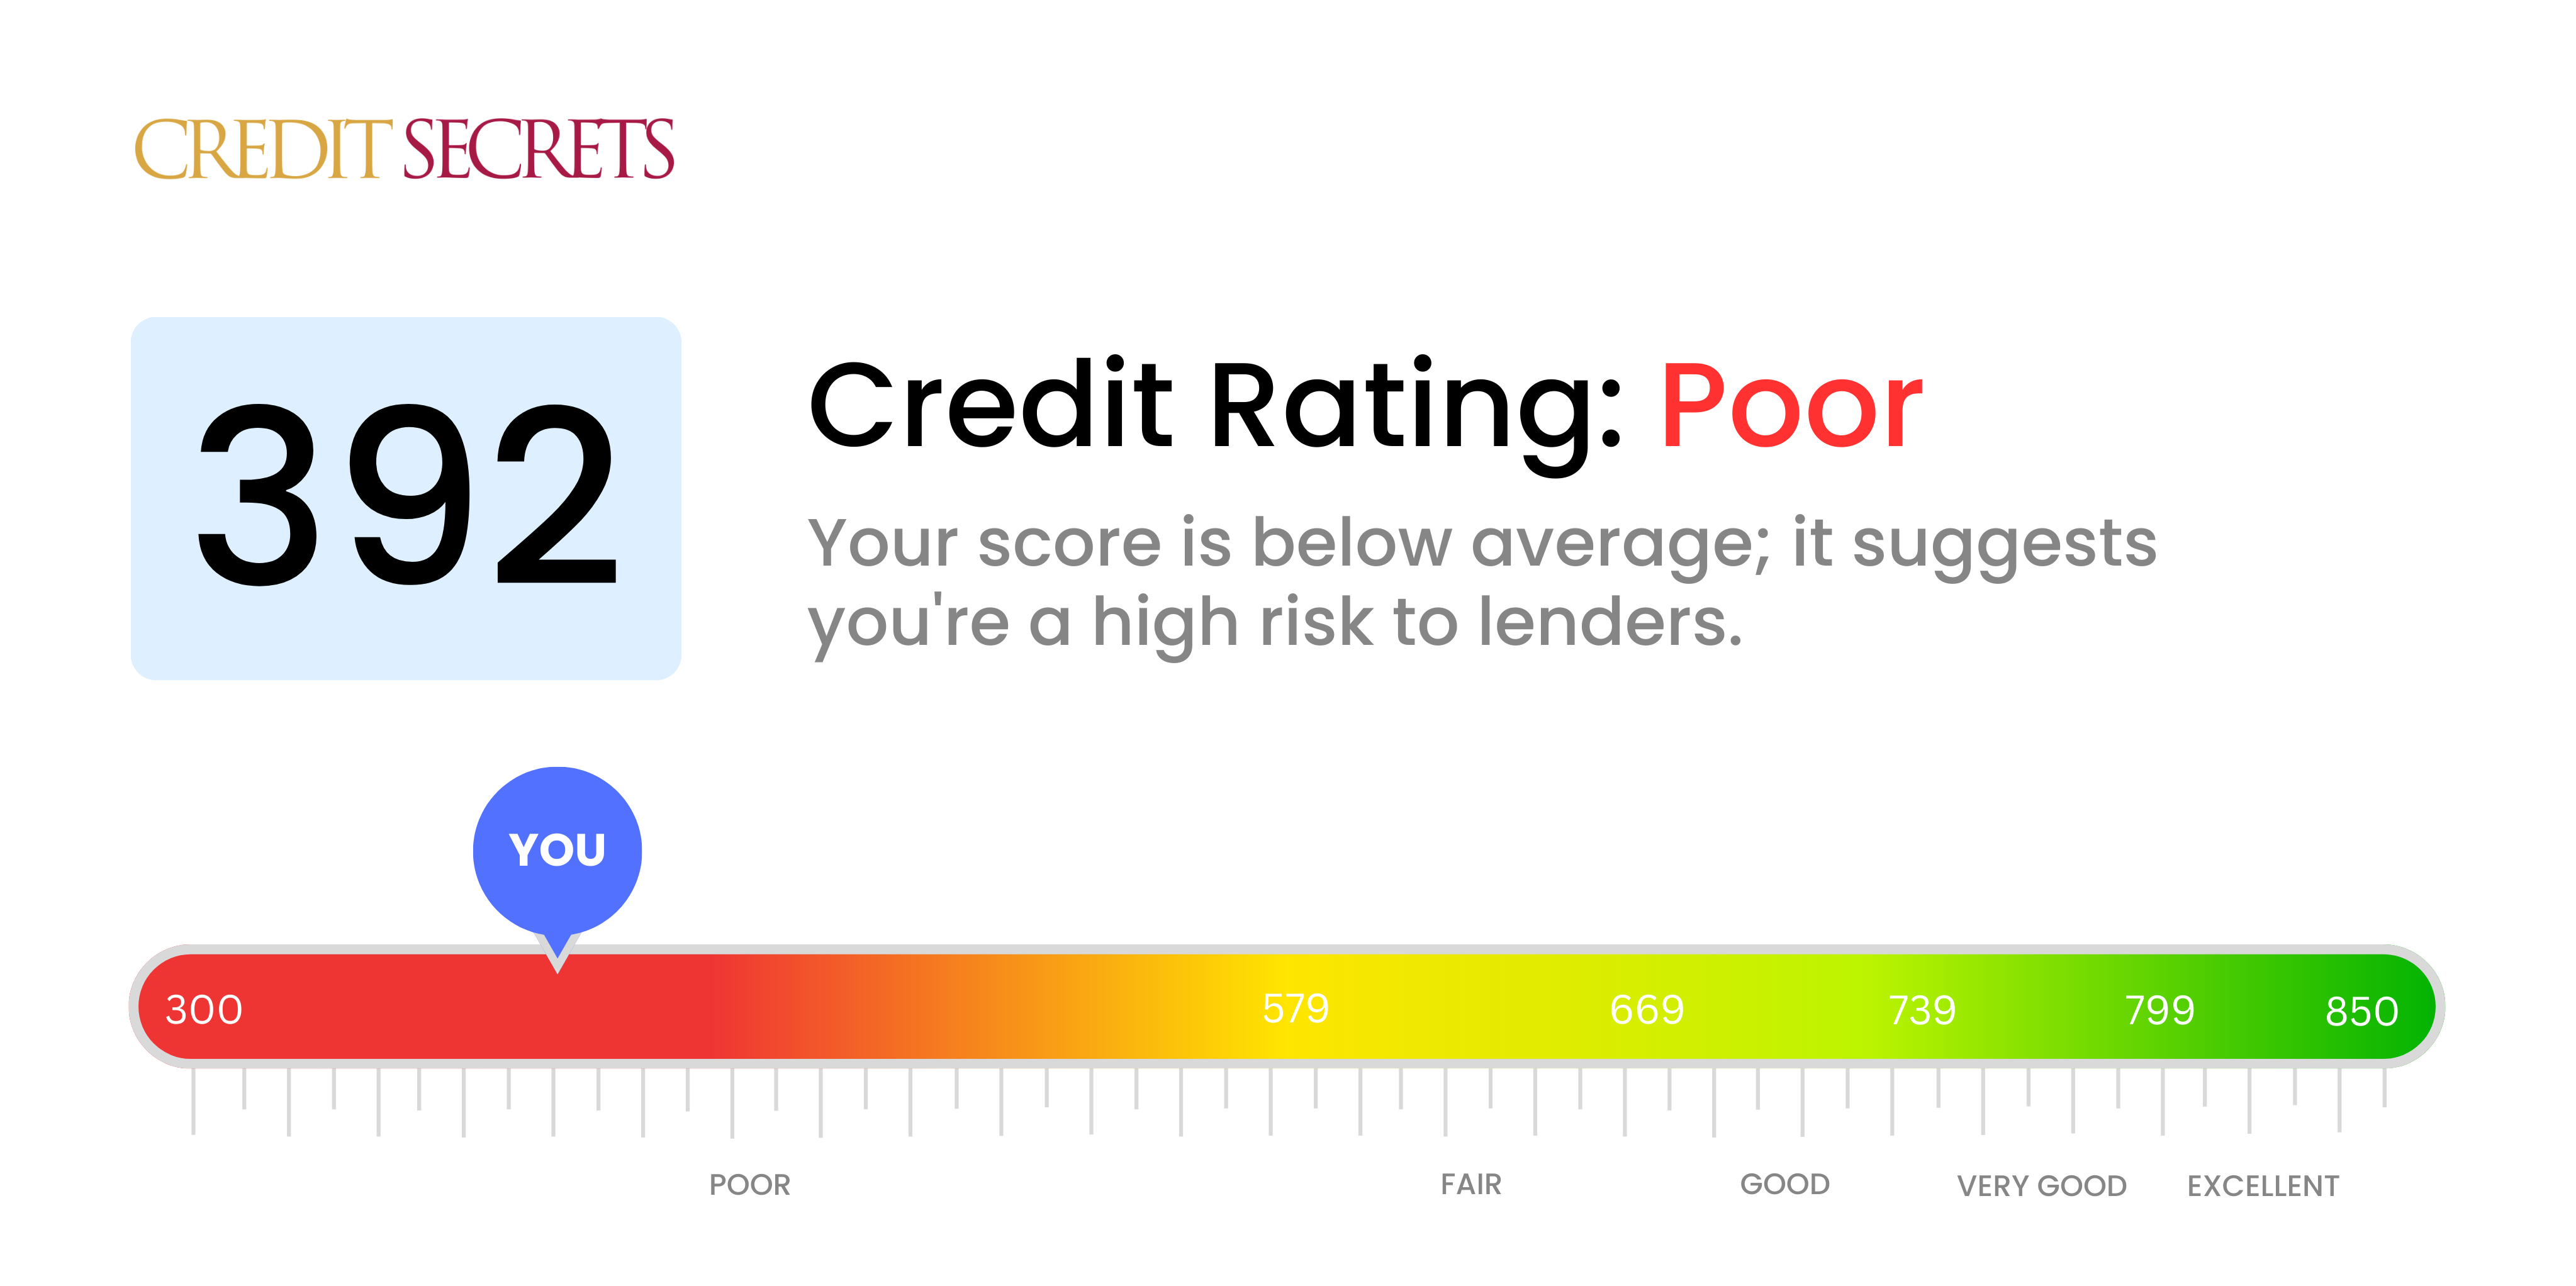 Is 392 a good credit score?